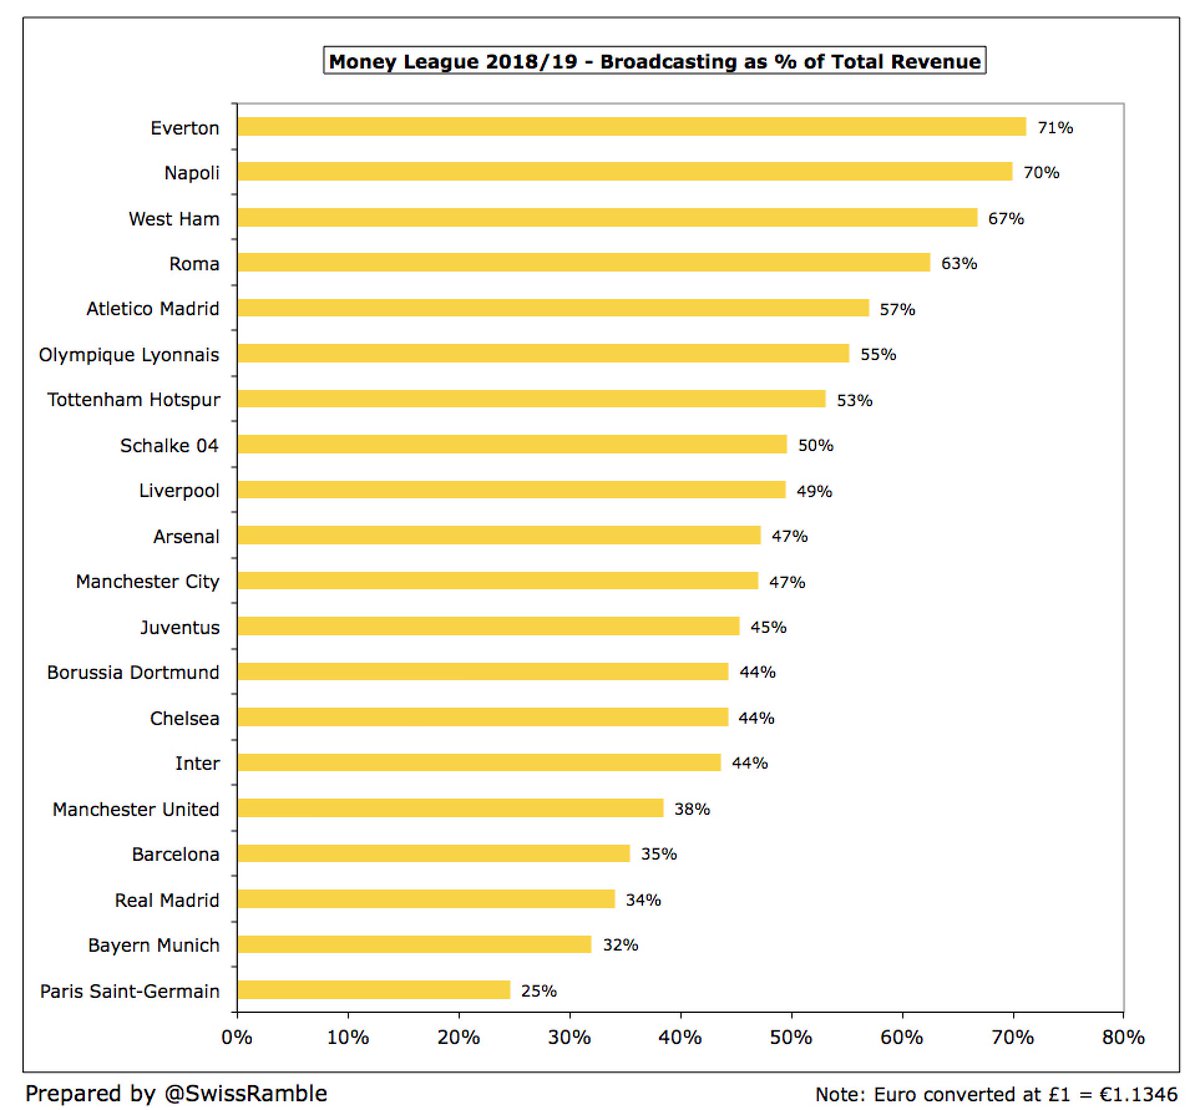 The importance of the Premier League TV deal to medium-size English clubs is highlighted by  #EFC and  #WHUFC generating 71% and 67% respectively of their revenue from broadcasting, despite not qualifying for Europe. Top placed clubs are far less reliant on TV than smaller clubs.